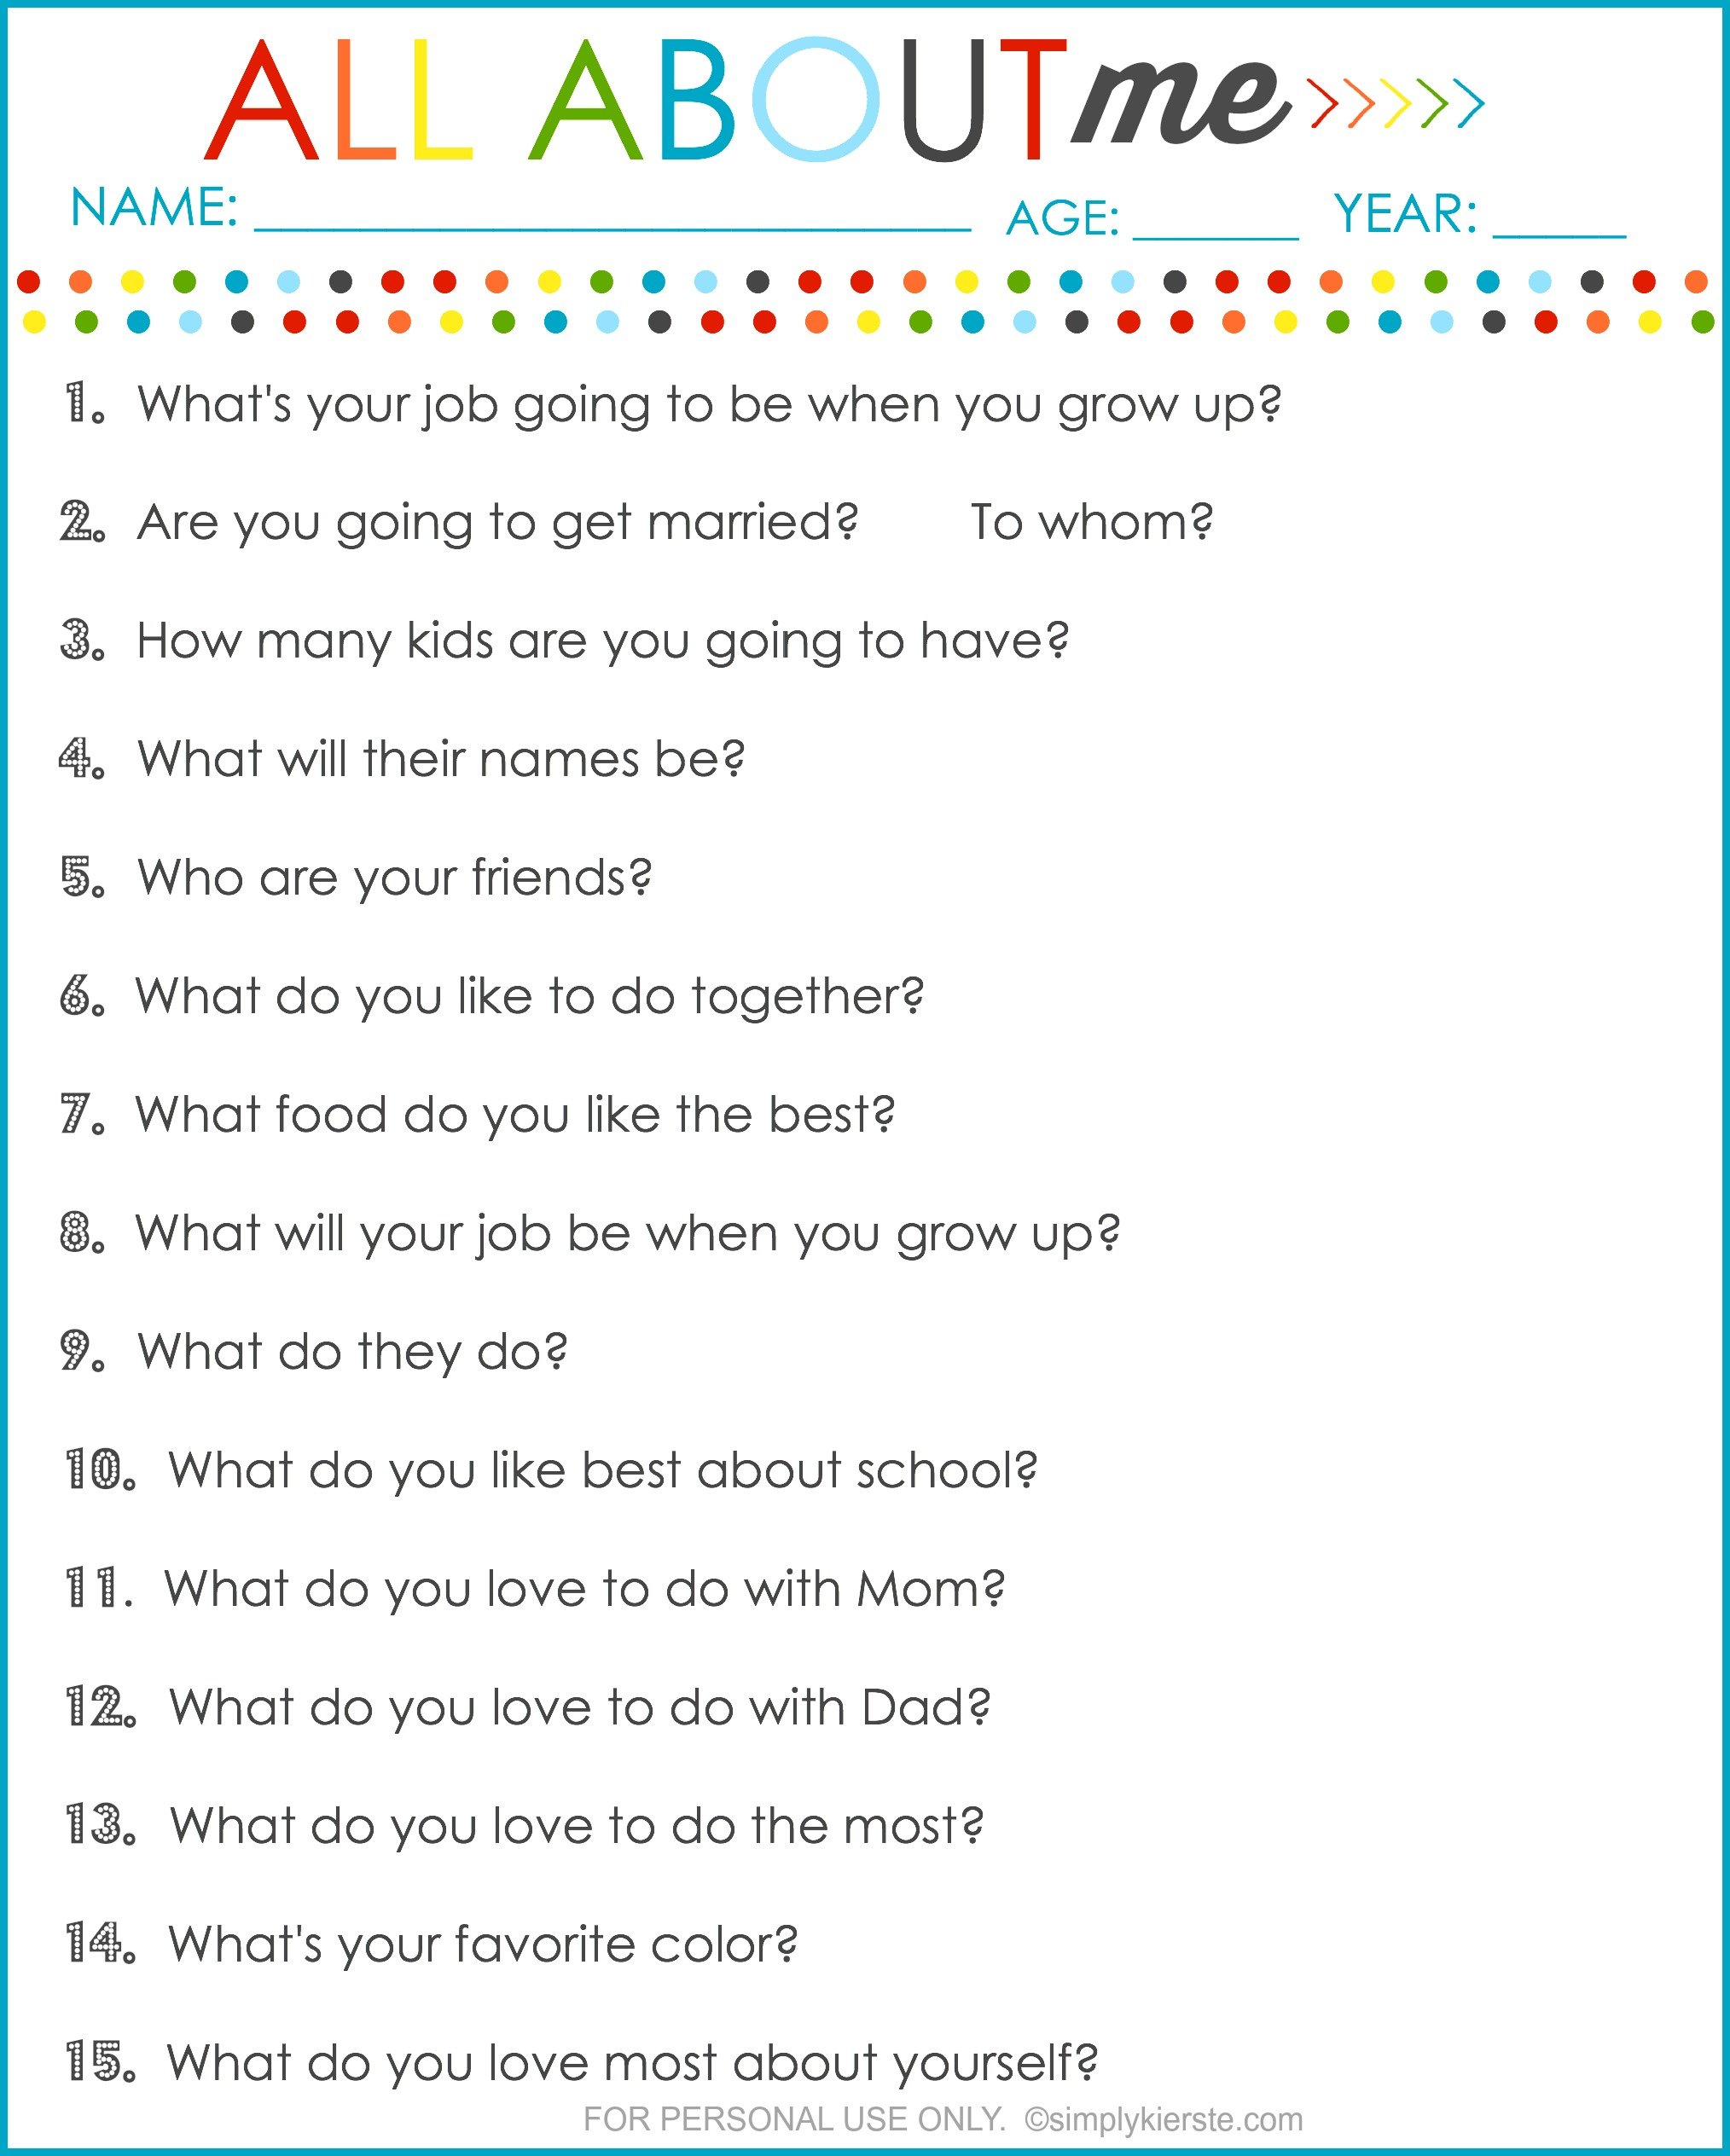 All about me: annual interview questions for kids